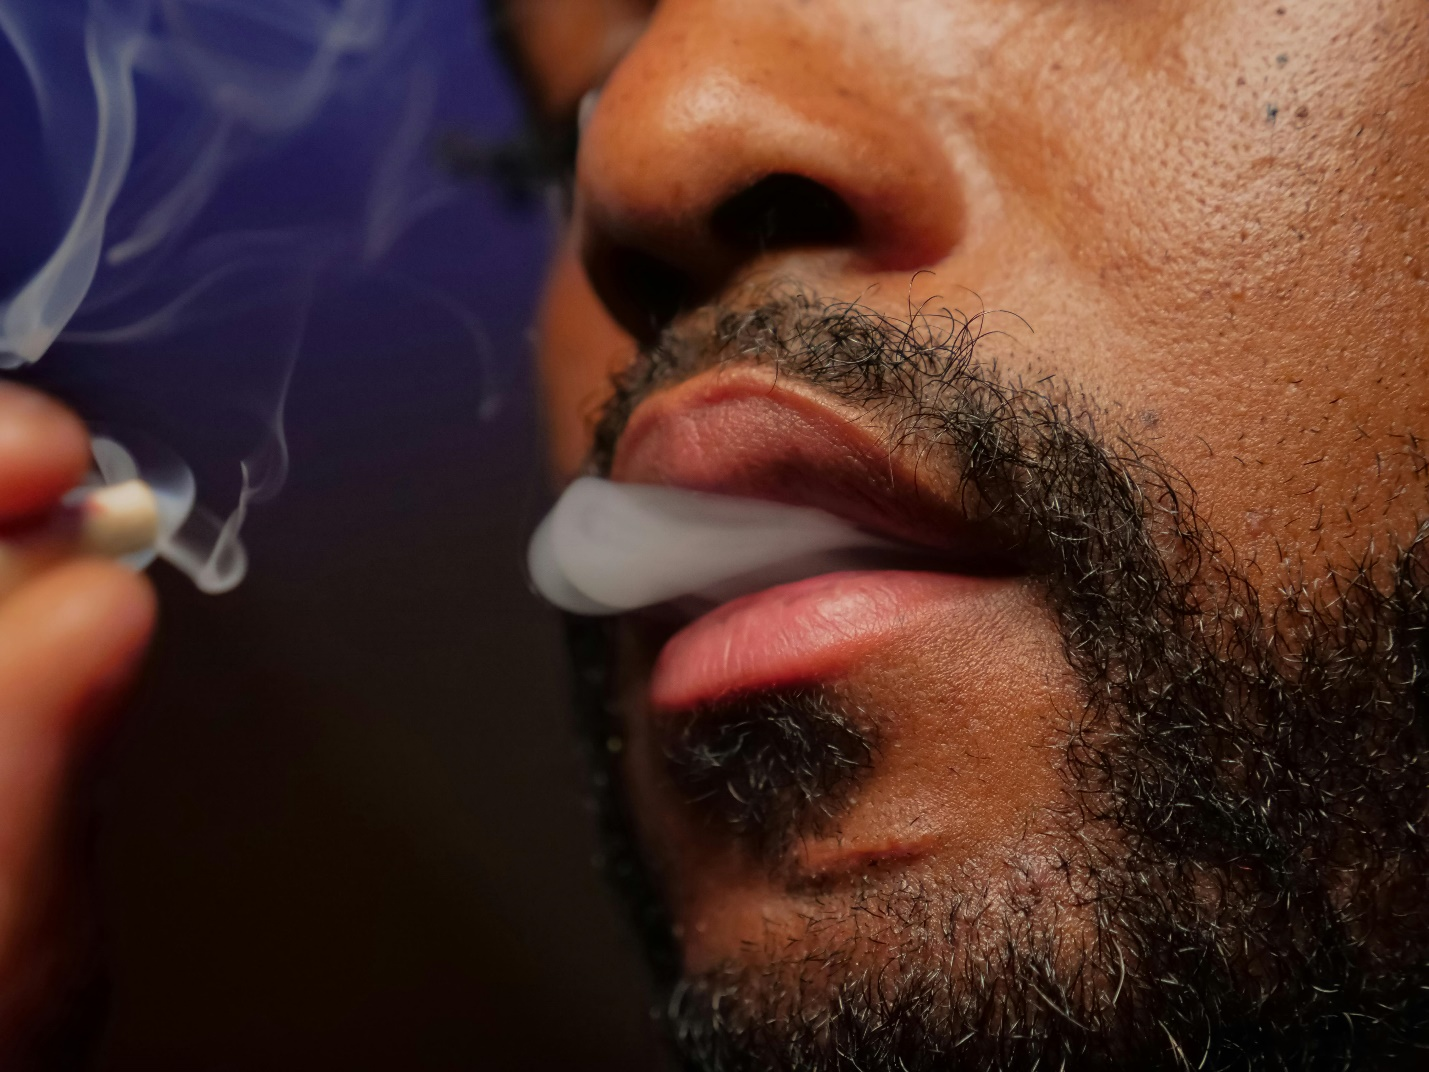 A close-up of a bearded man's nose and mouth as smoke exits a small gap between his lips, holding a joint between his thumb and forefinger amidst a cloud of smoke, epitomizing the enjoyment of cannabis pre-rolls.